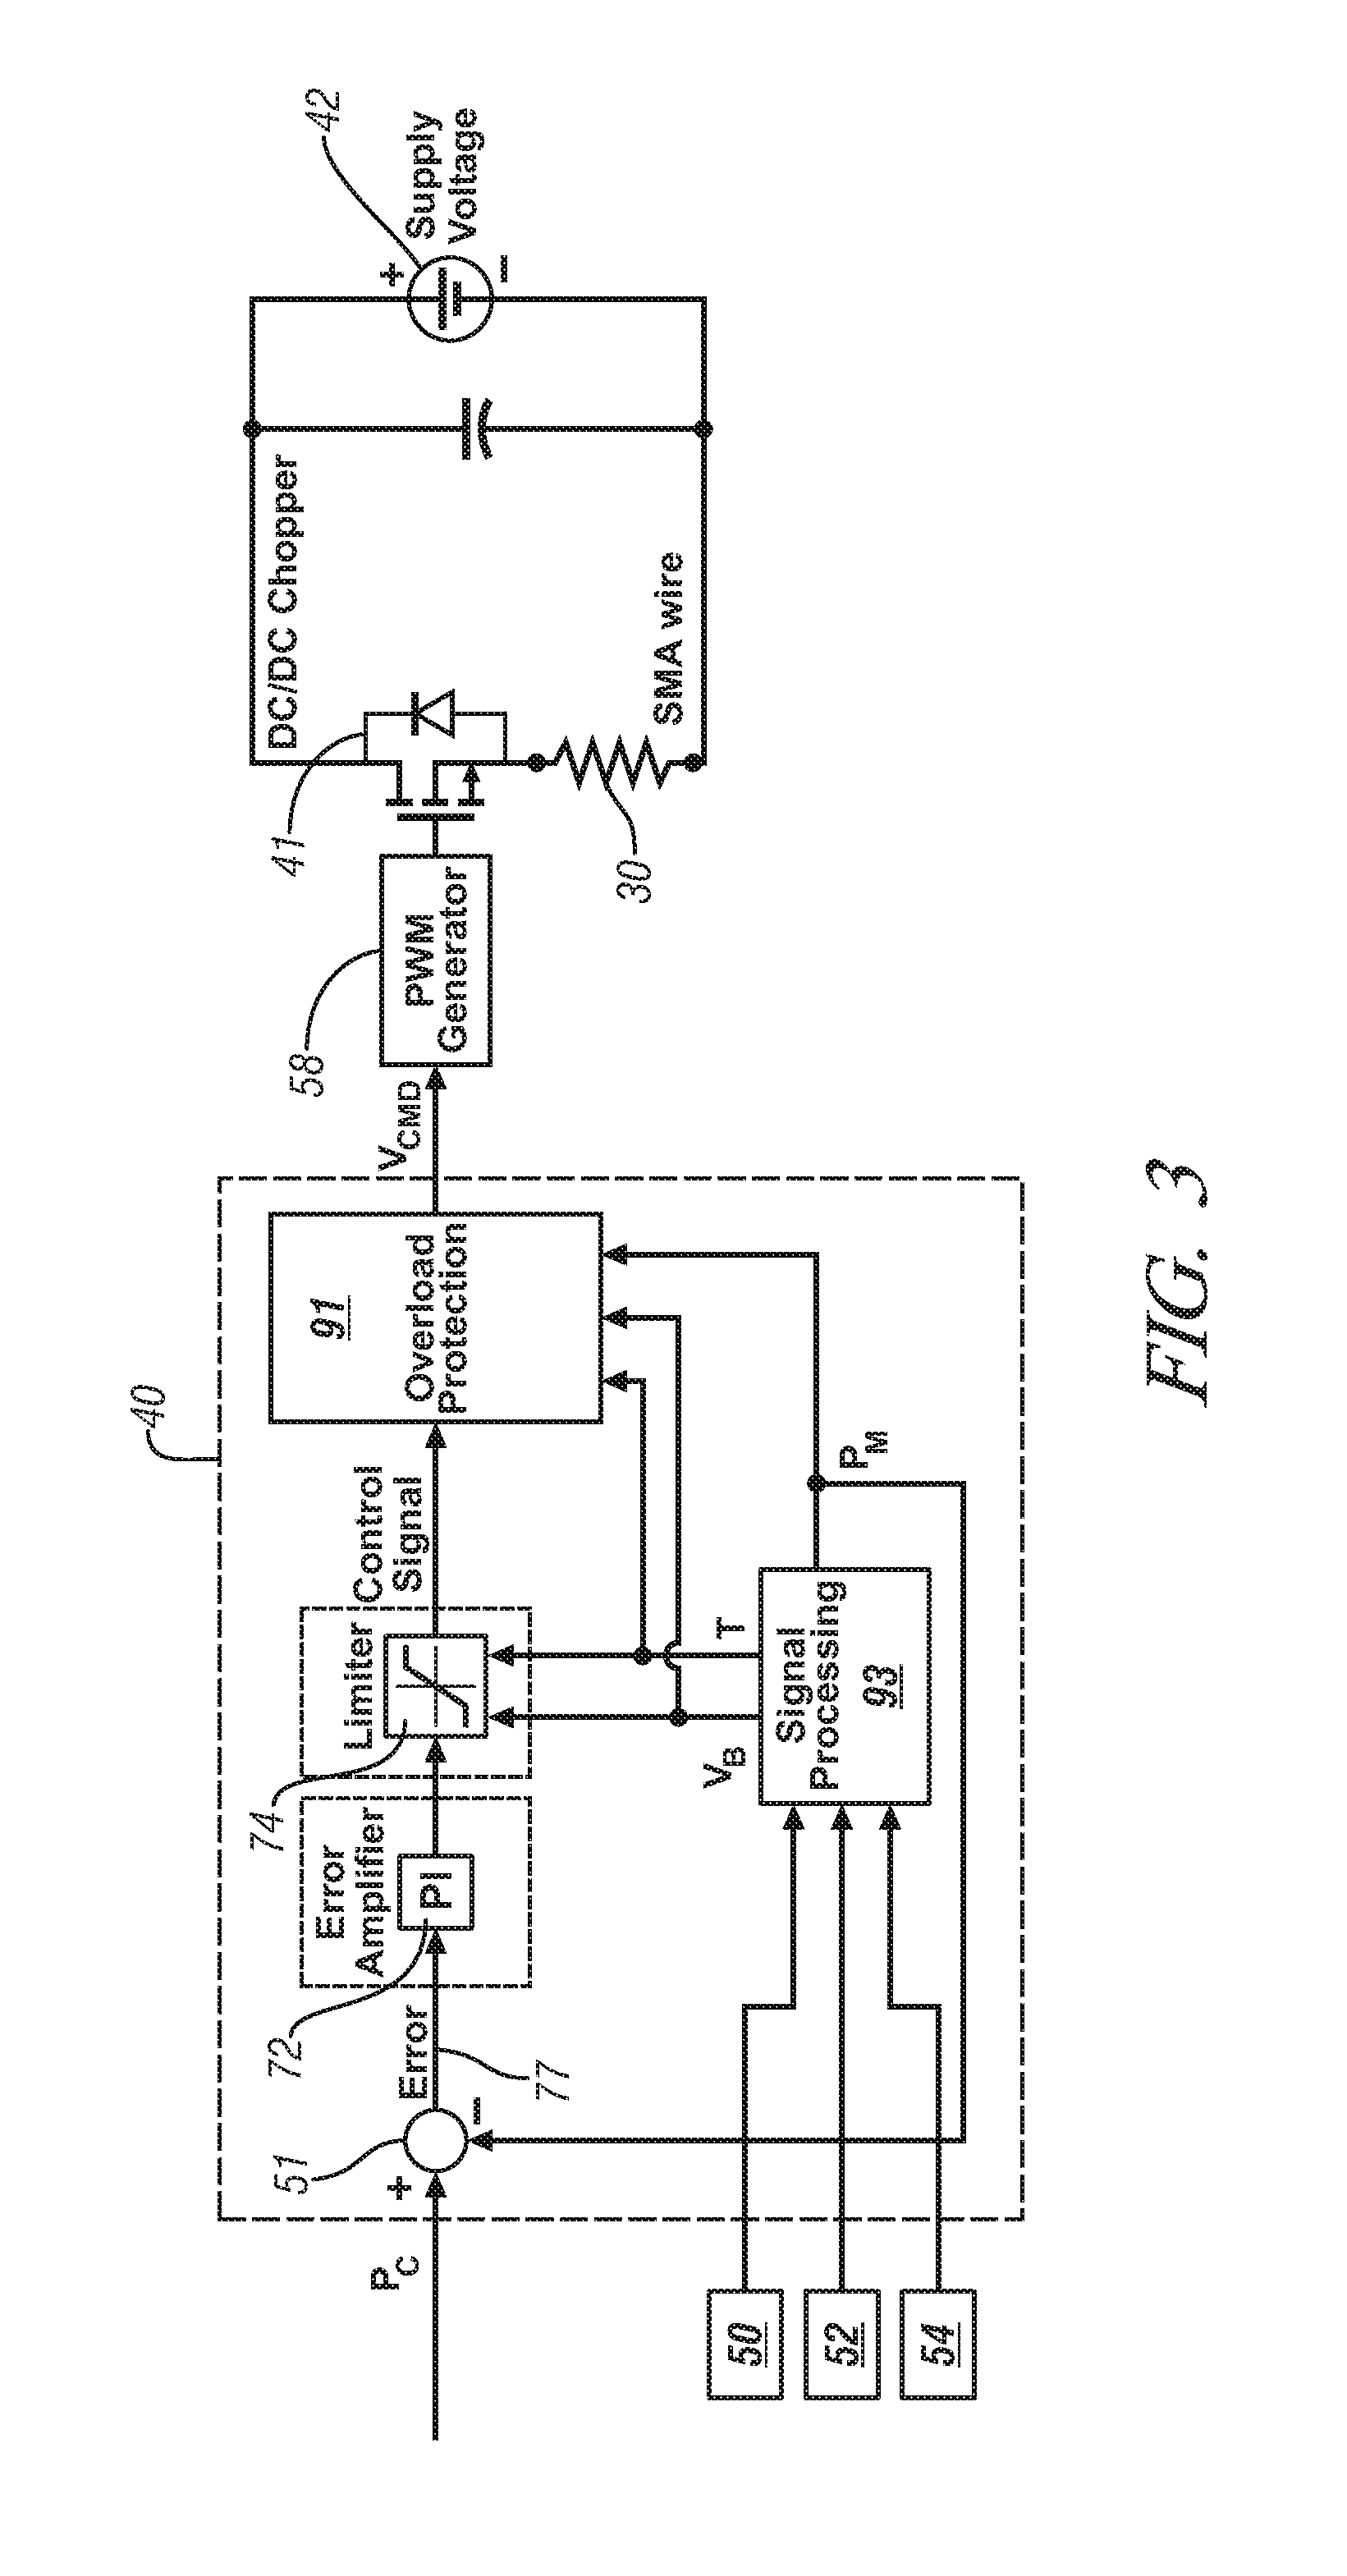 Actuator system including an active material